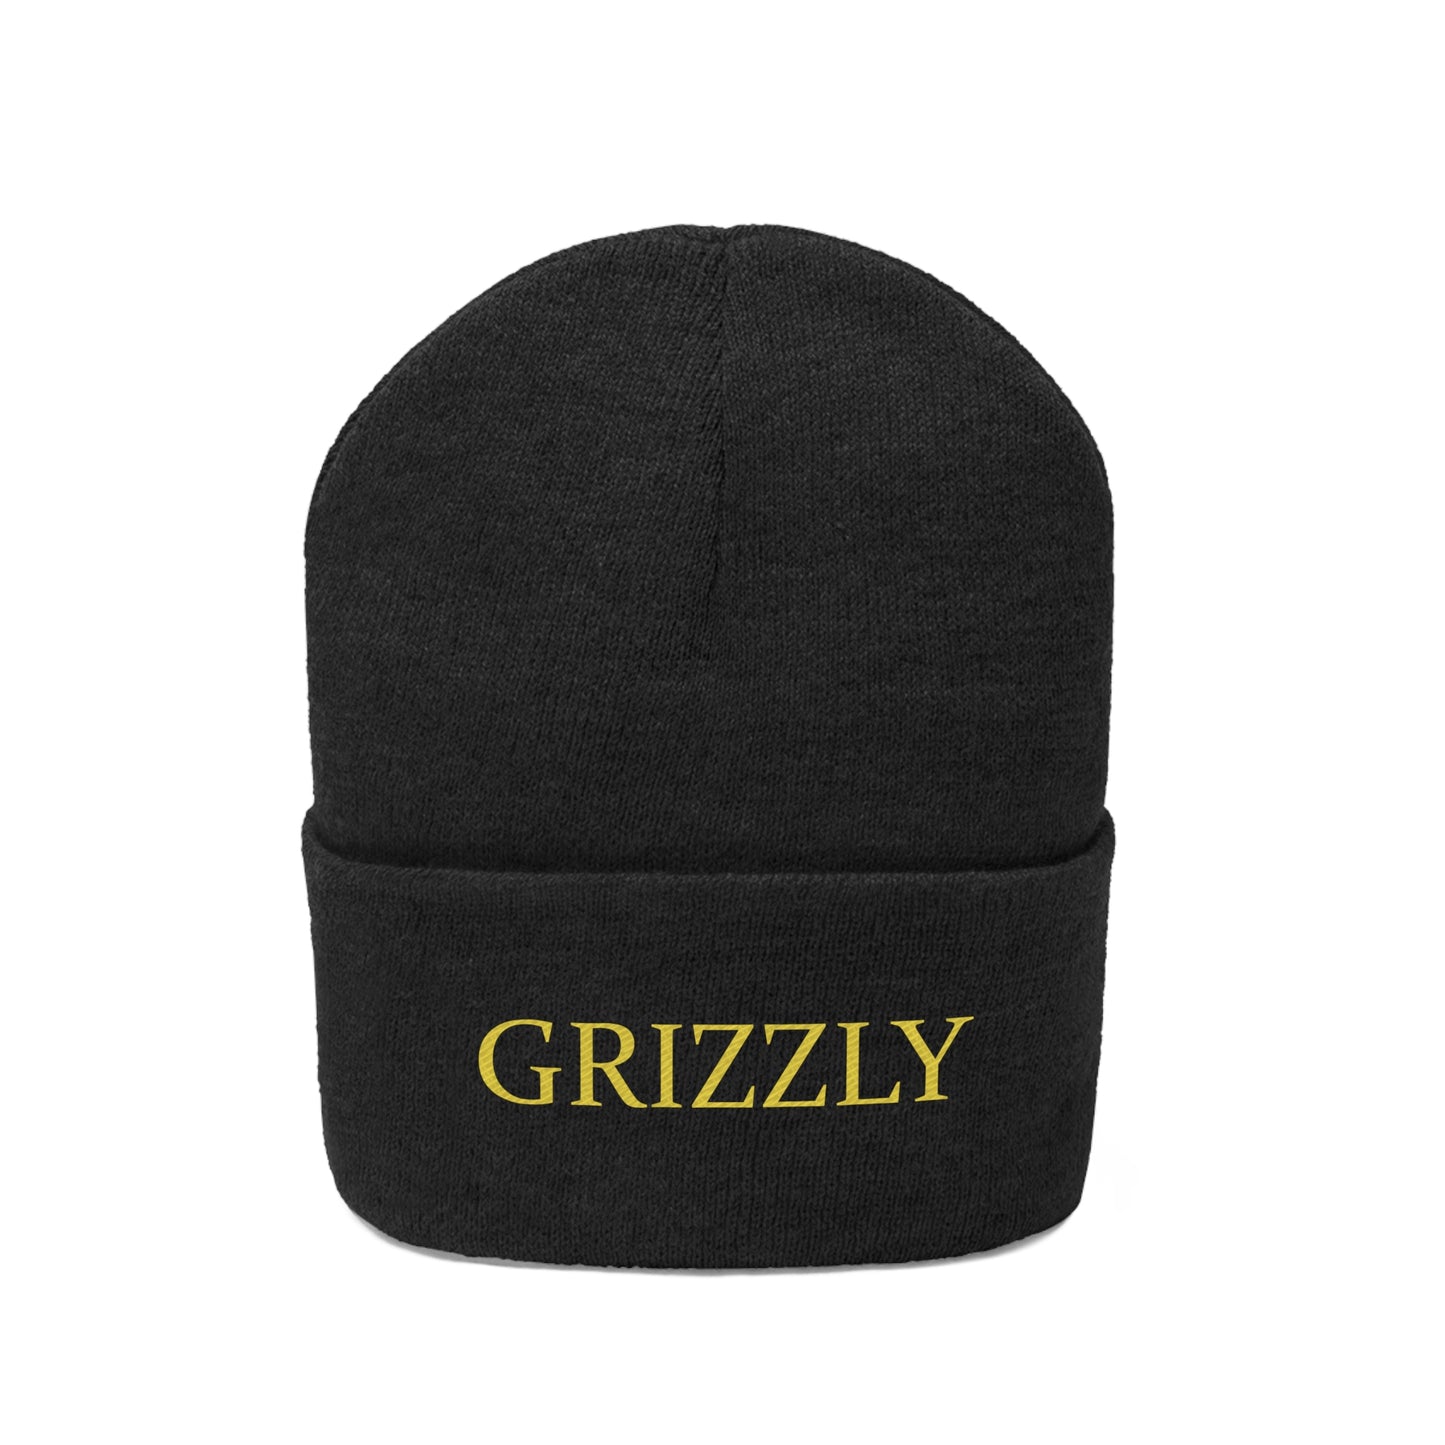 GGC "Grizzly" Knit Beanie - Gold Font